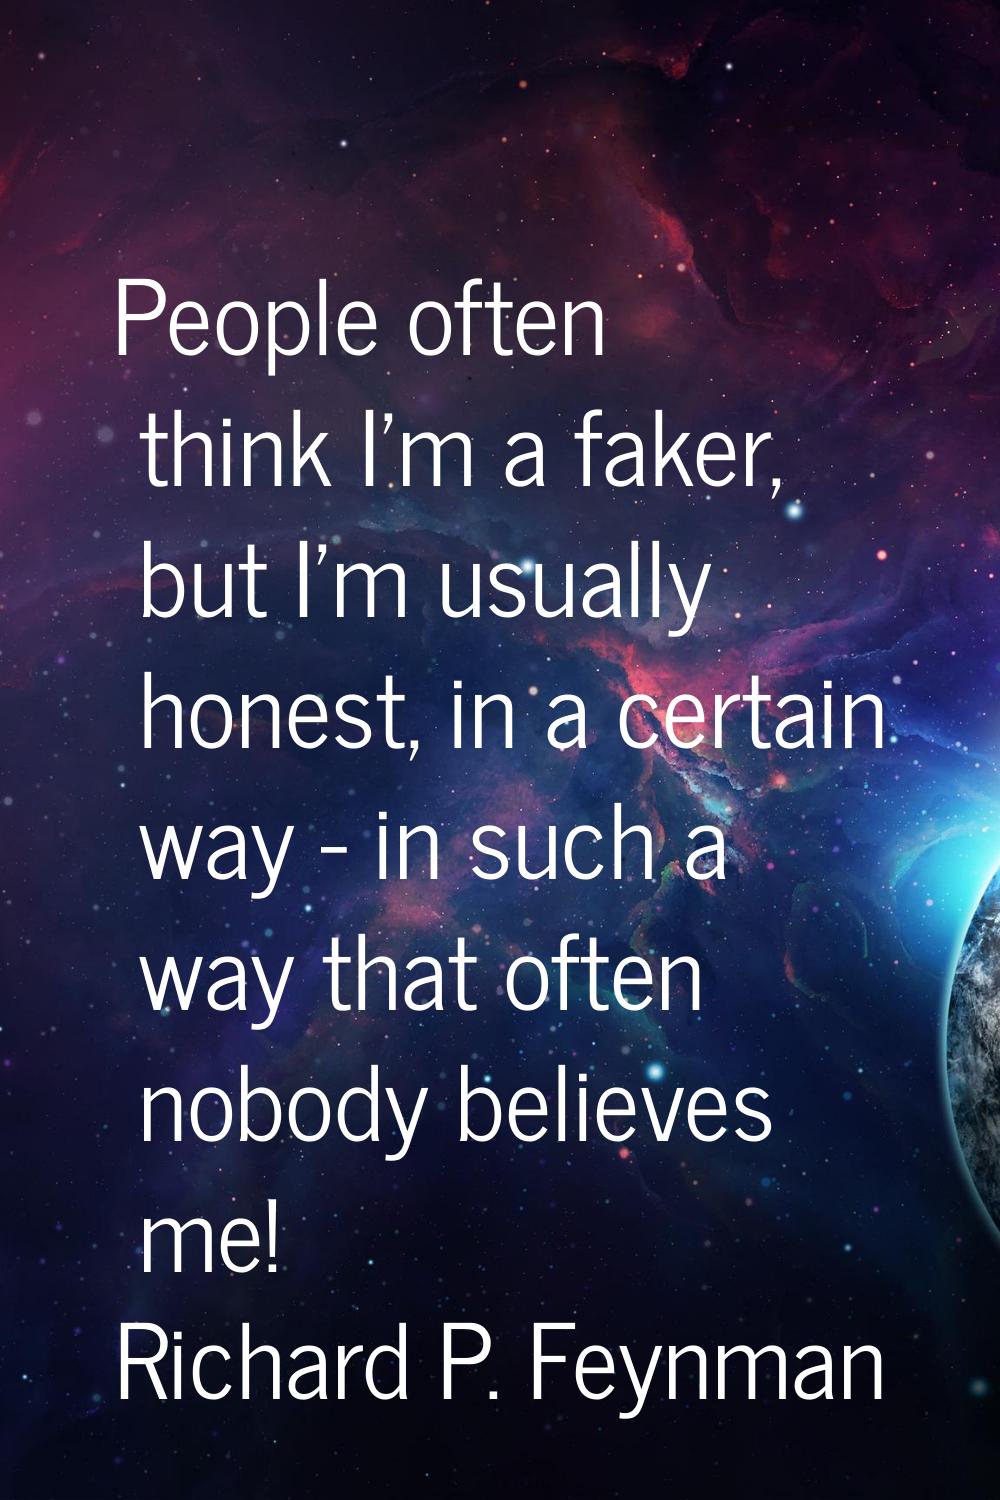 People often think I'm a faker, but I'm usually honest, in a certain way - in such a way that often